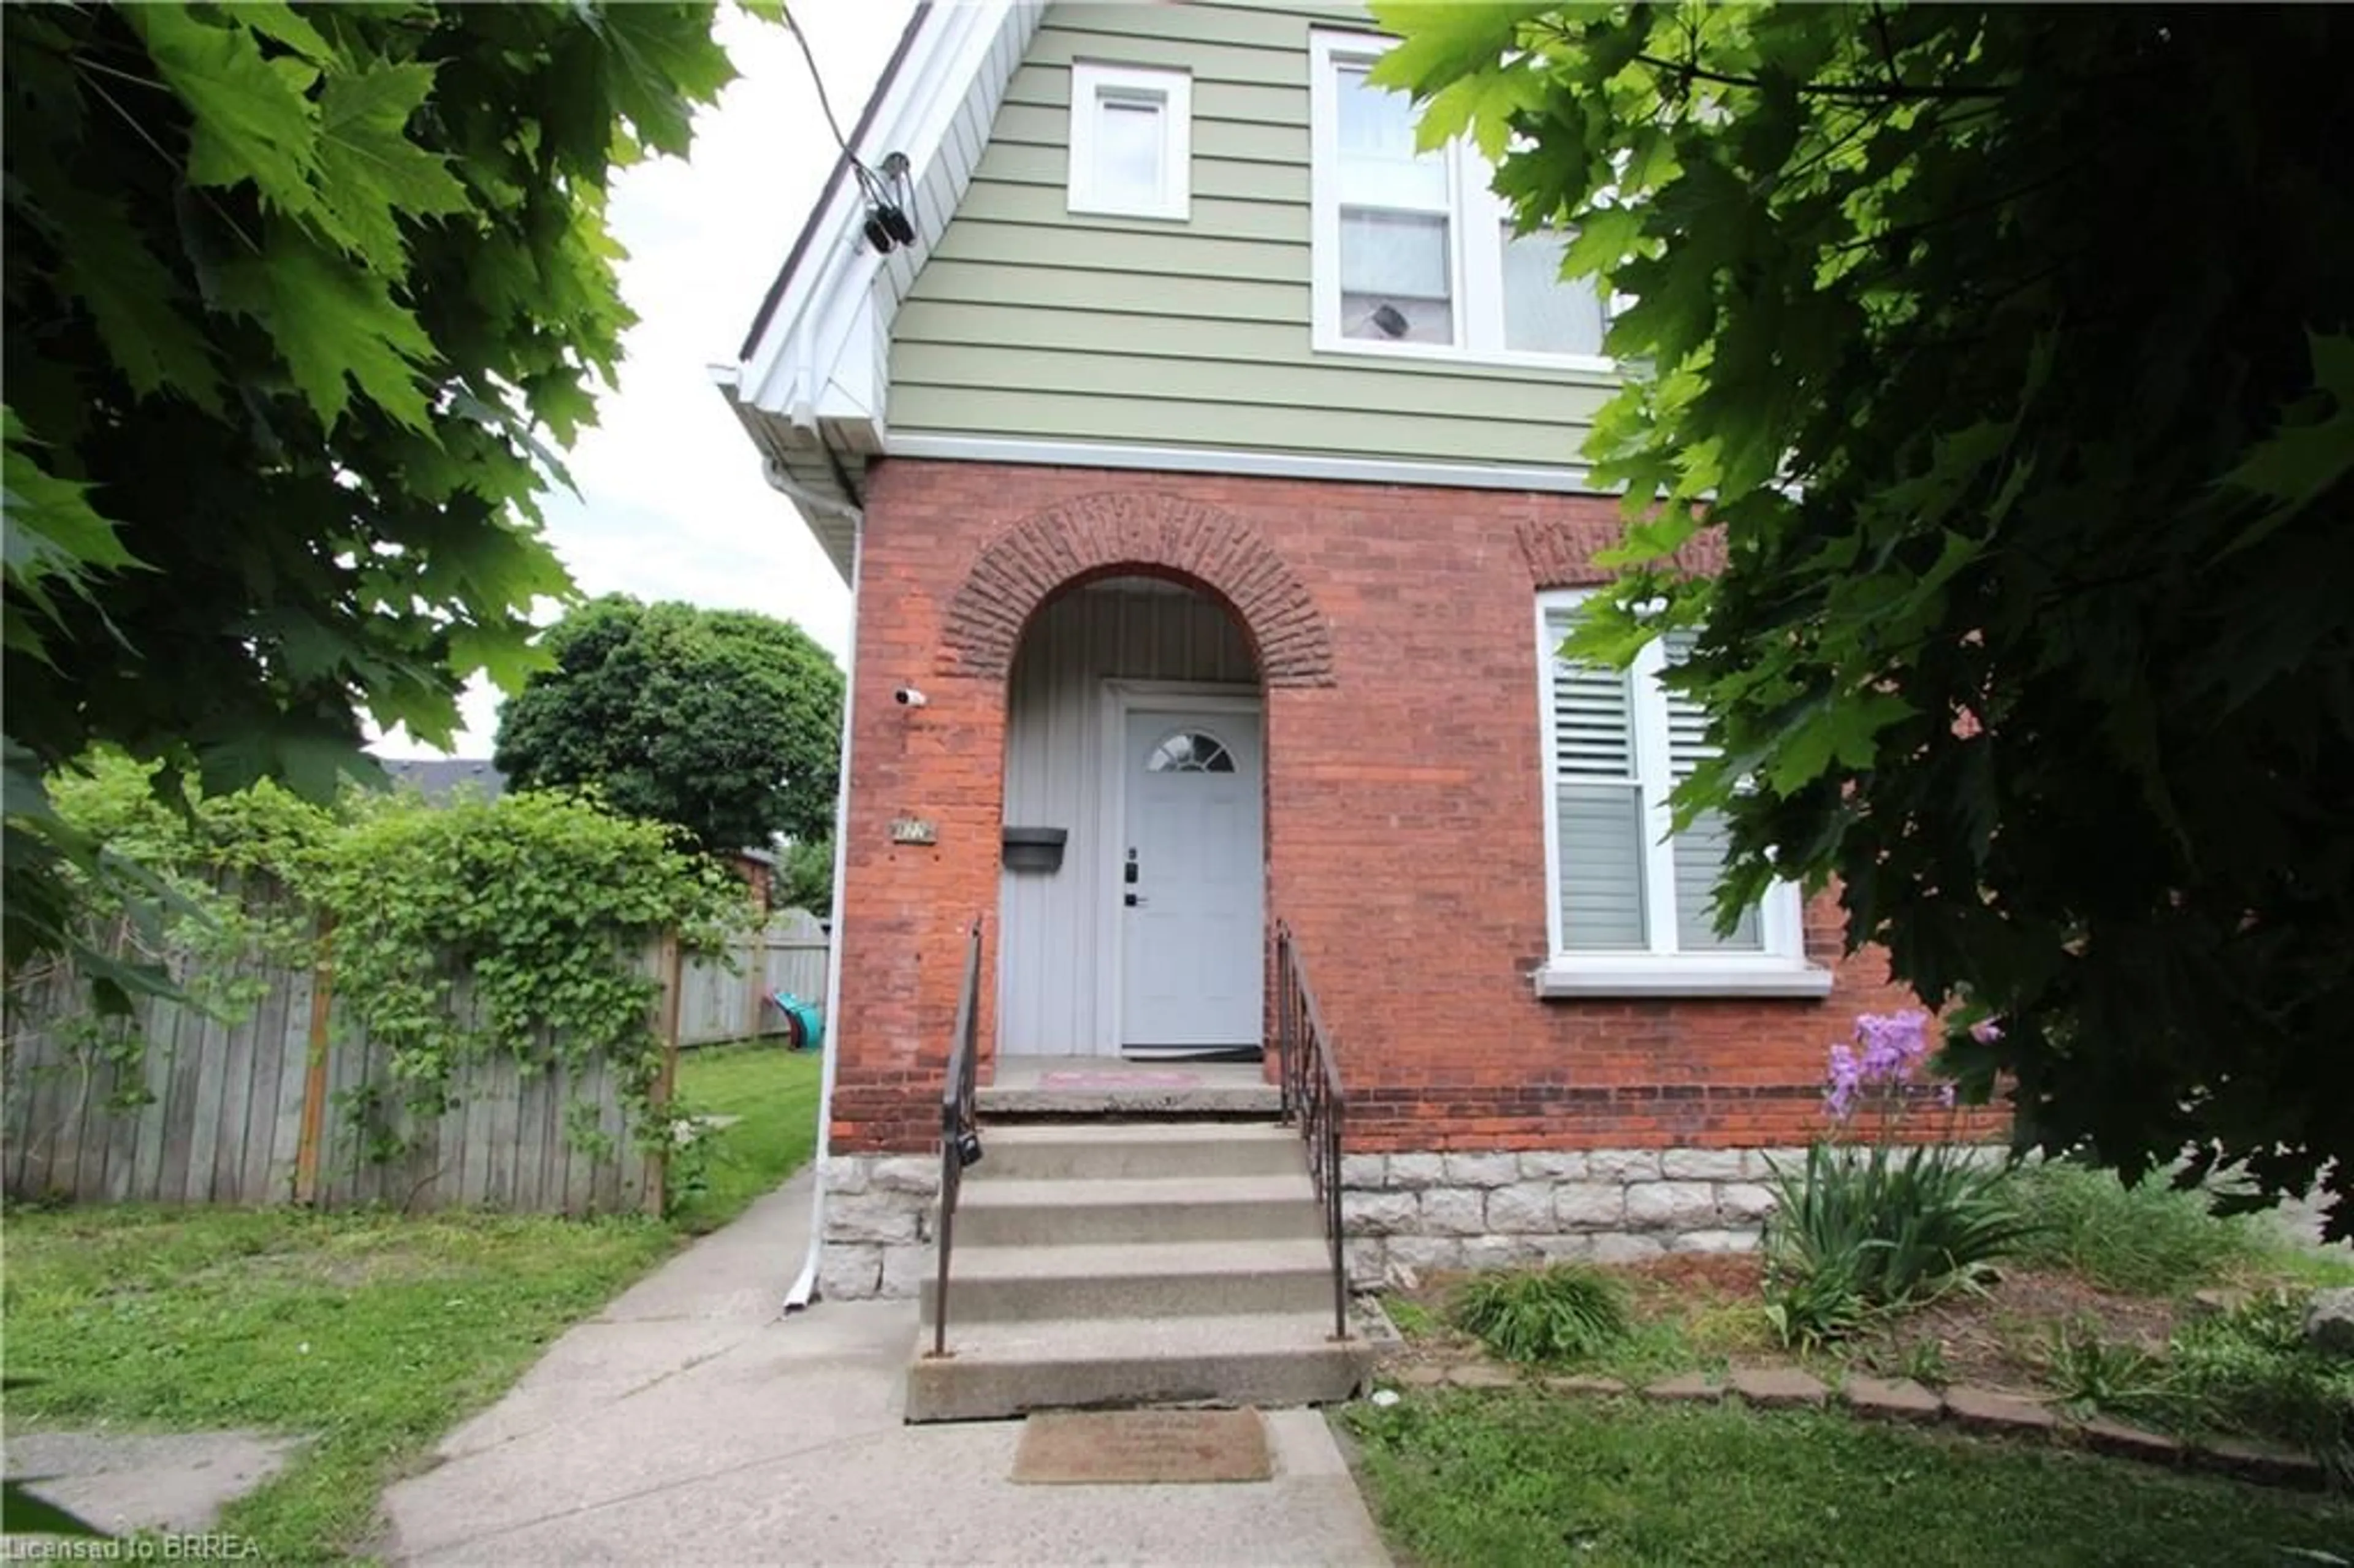 Outside view for 122 Chatham St, Brantford Ontario N3S 4G4